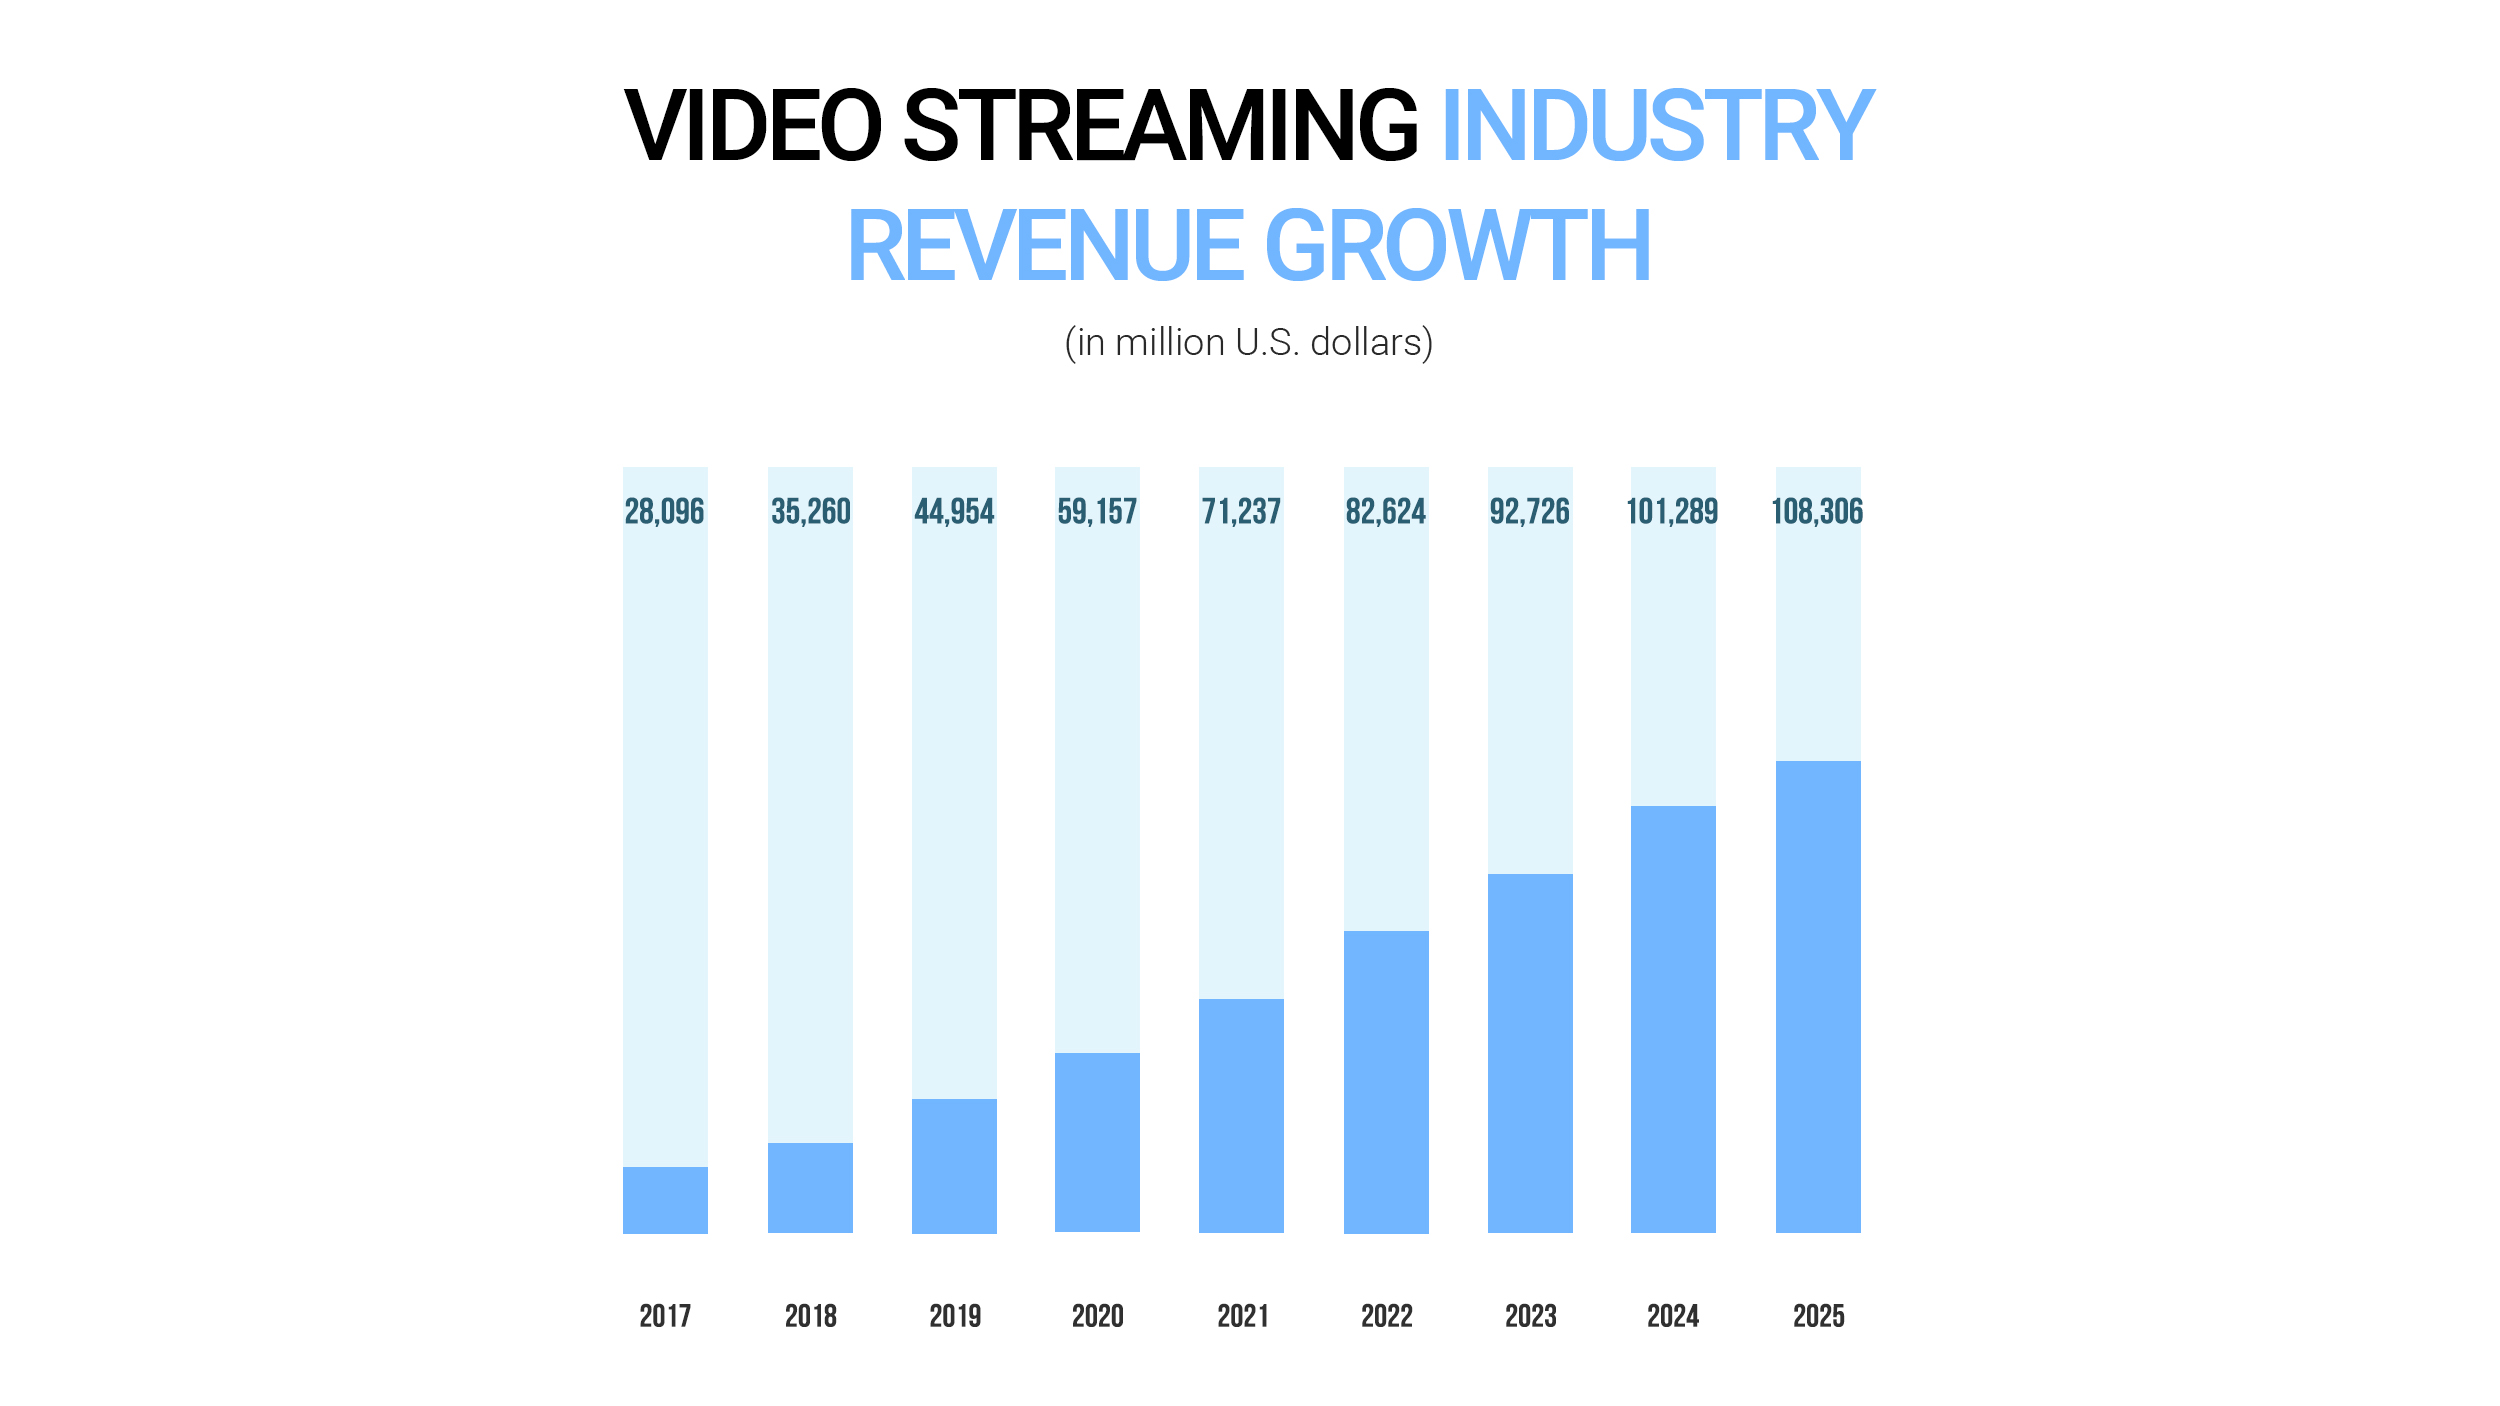 Video streaming industry revenue growth